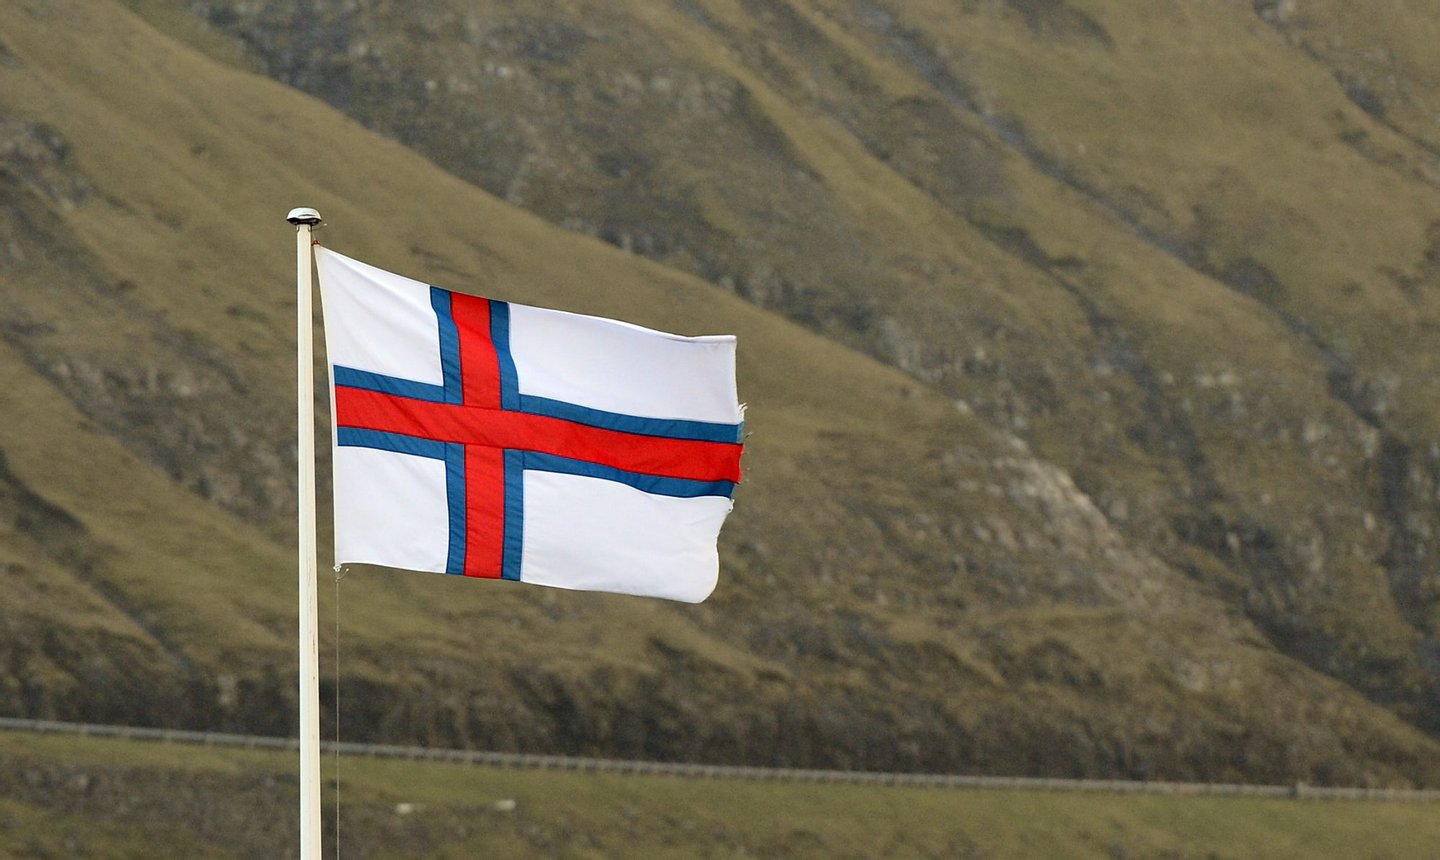 The Faroe Islands flag is pictured at the Vestmanna village Streymoy island on October 14, 2012, Faroe Islands. The Faroe Islands are known for its fishing and sheep farming as the main industries. AFP PHOTO / JONATHAN NACKSTRAND (Photo credit should read JONATHAN NACKSTRAND/AFP/Getty Images)